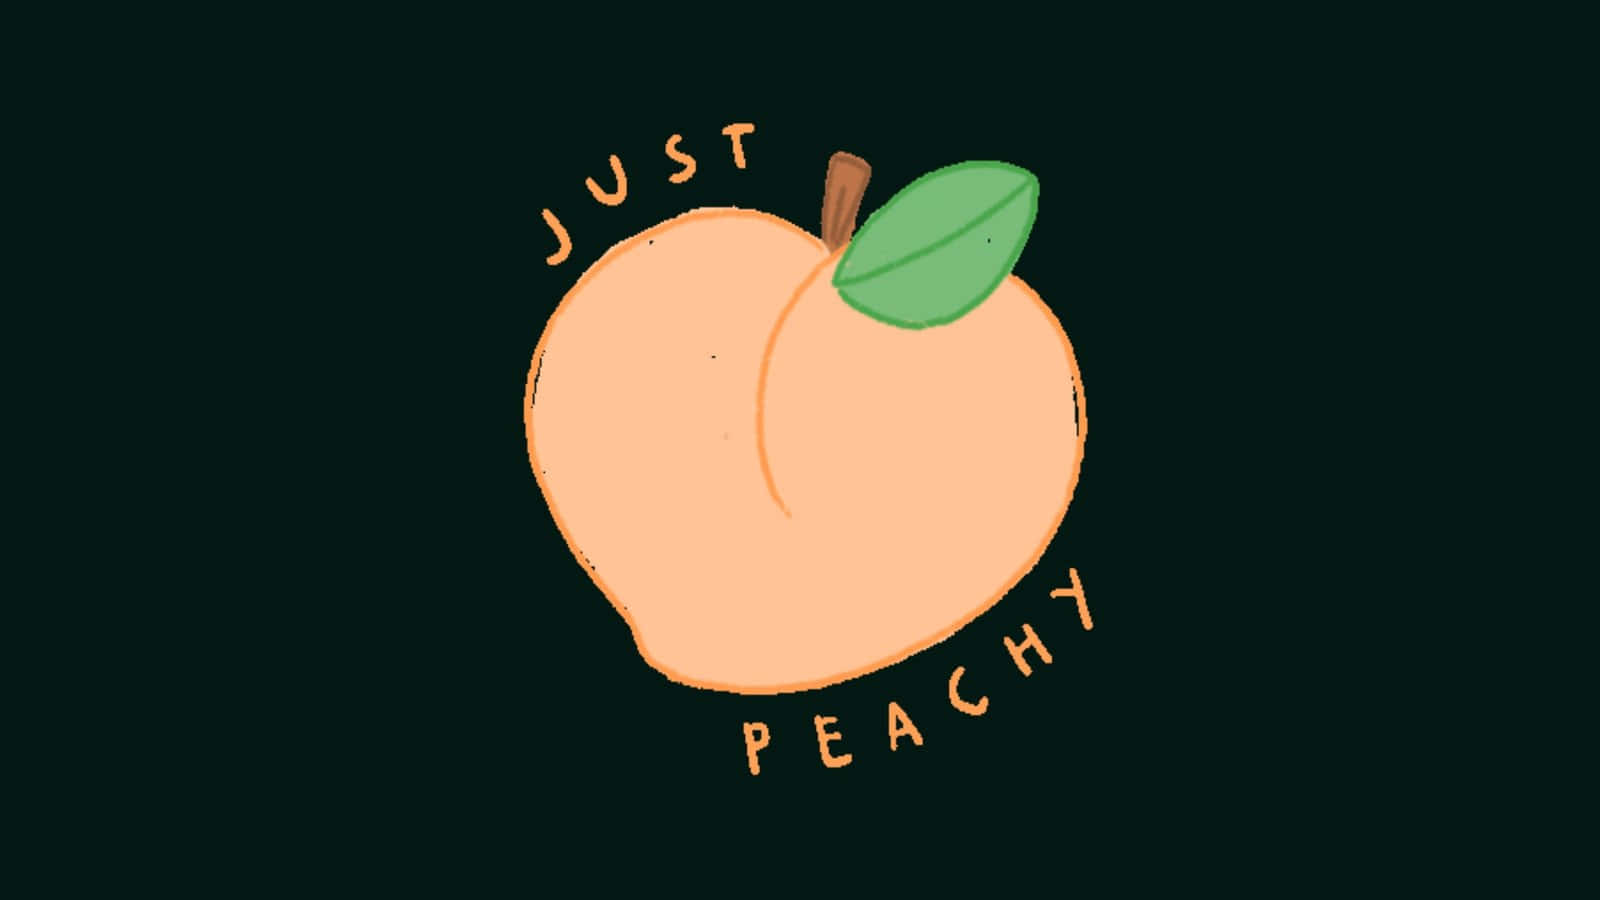 Enjoy this beautiful day with a cute peach! Wallpaper